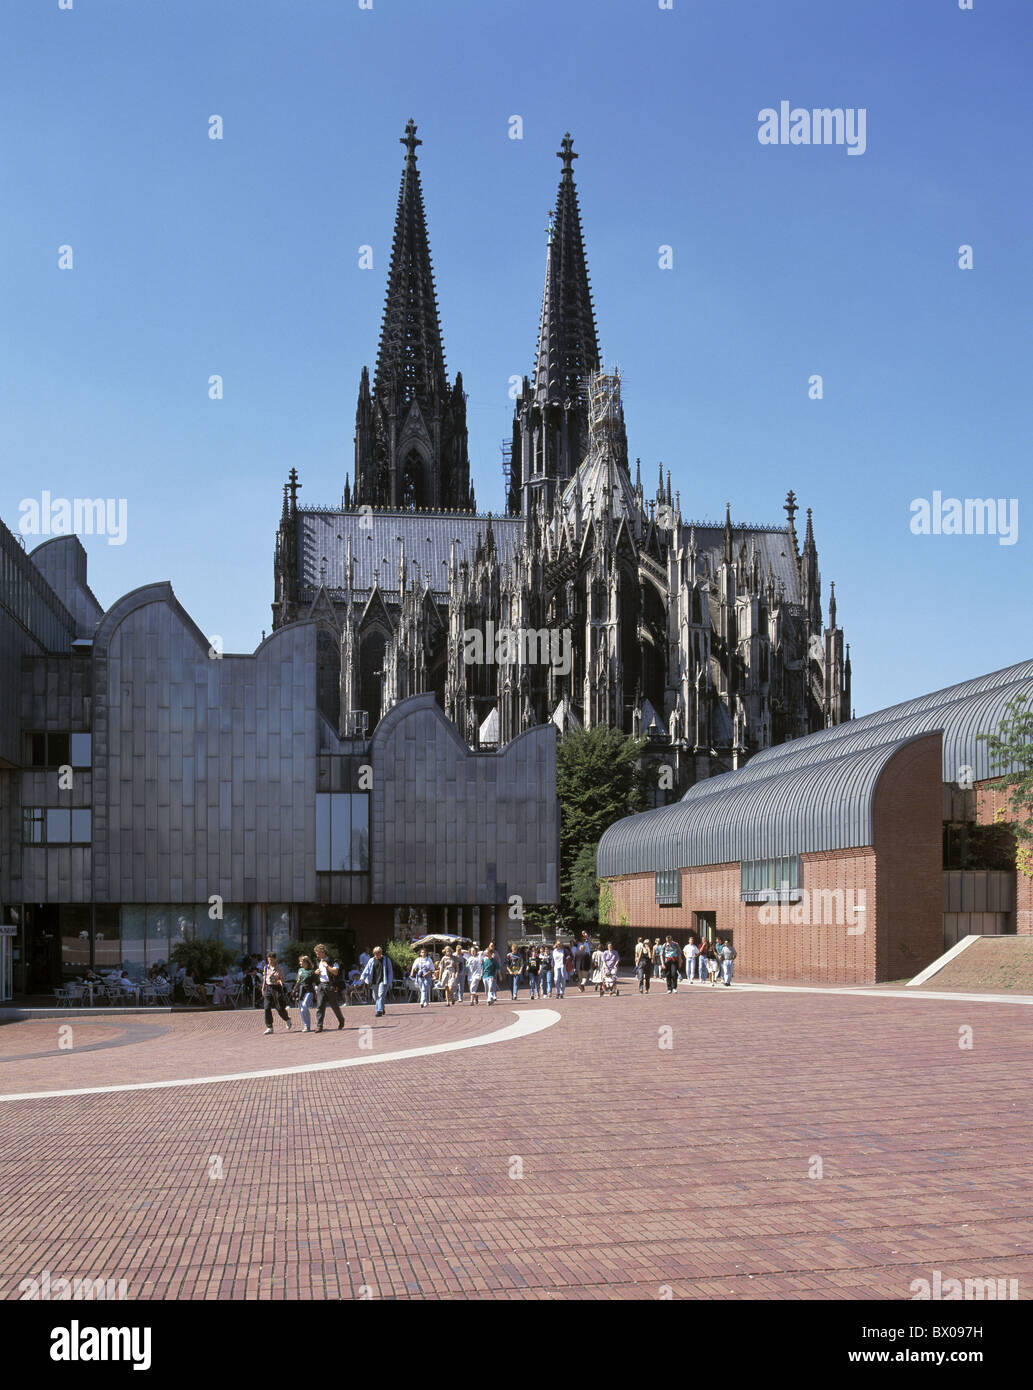 Germany Europe city center Cologne Cologne Cathedral Ludwig museum person Nordrhein Westphalia place town Stock Photo